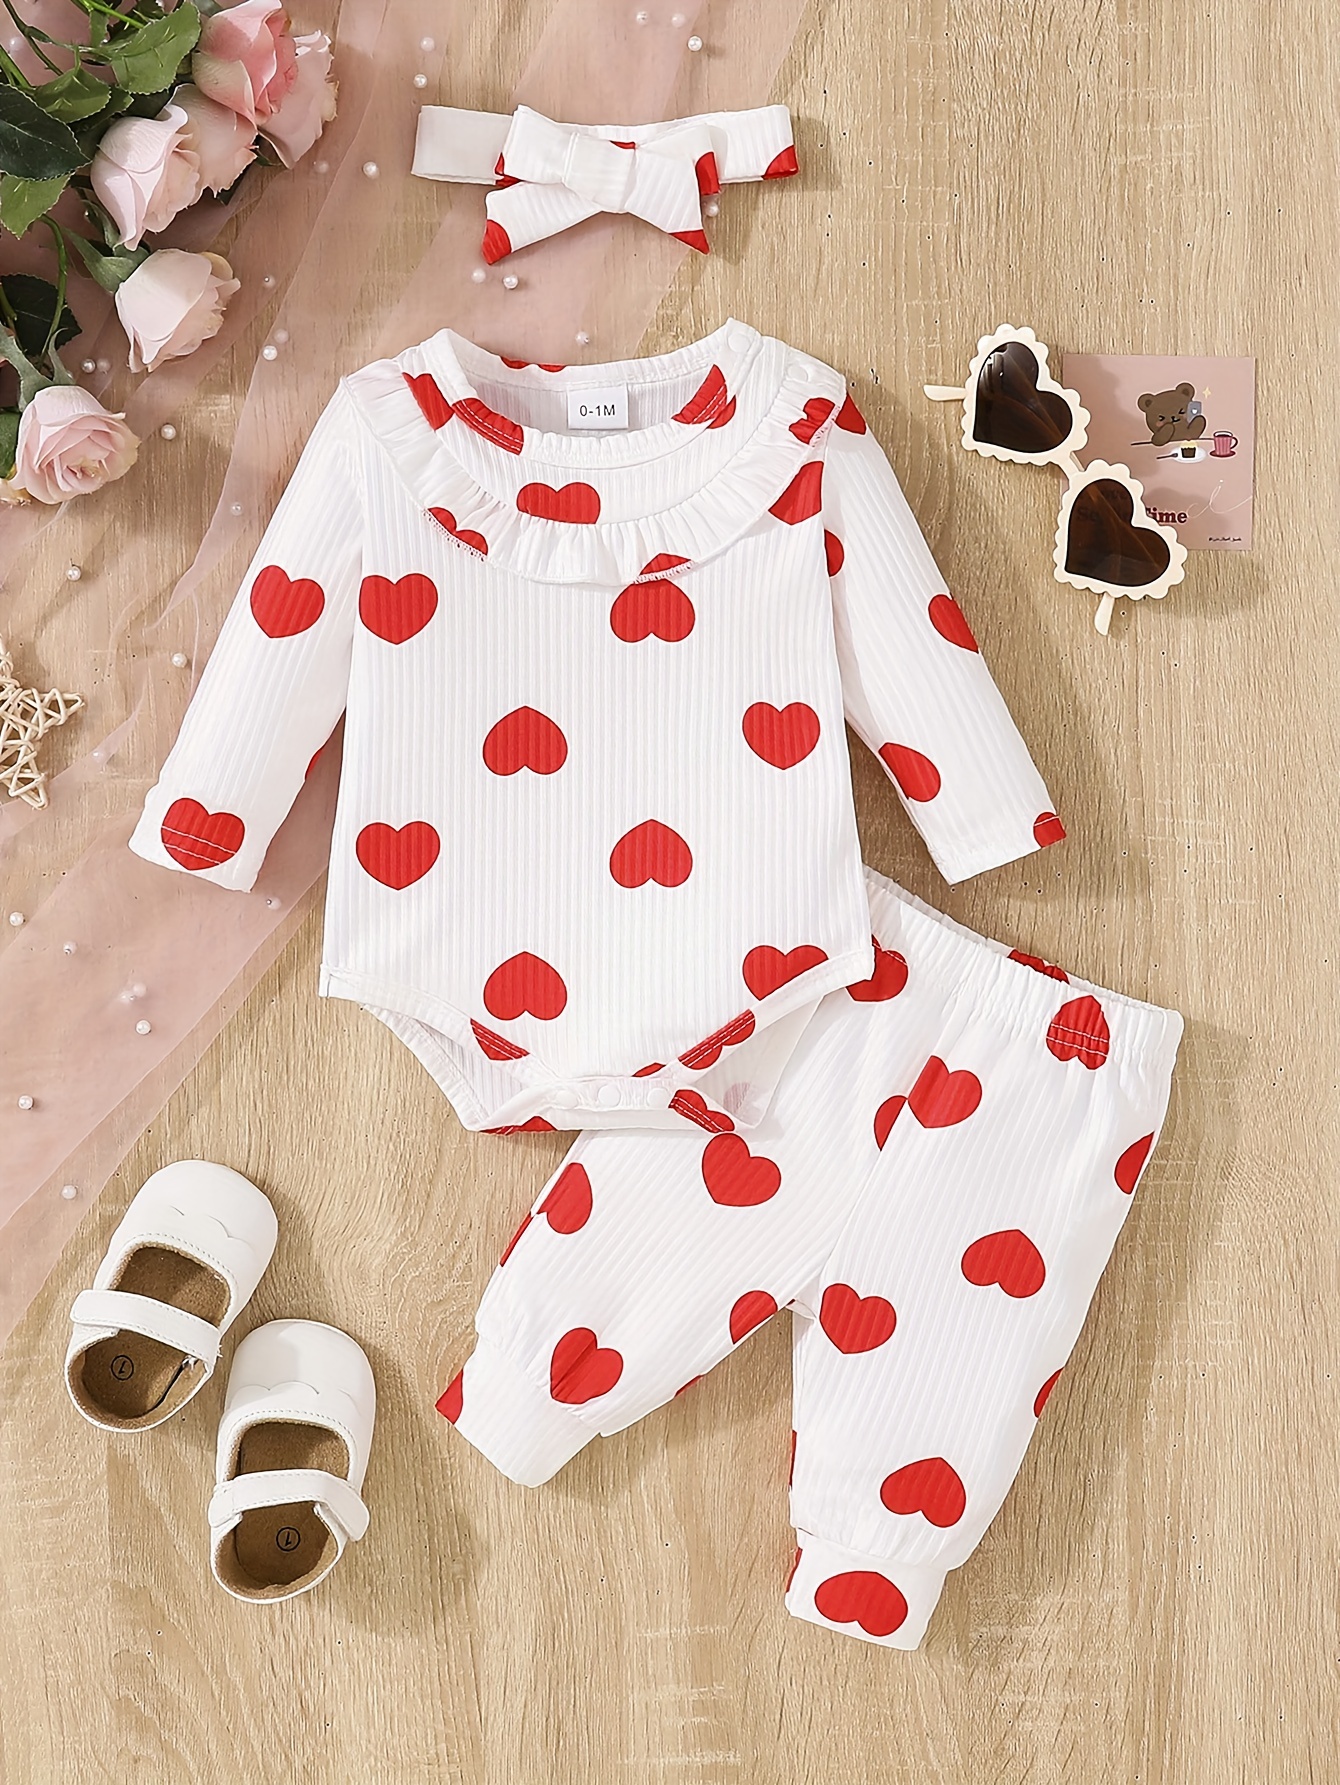 Sequined Heart Romper Top And Leopard Pants Set In For Newborn